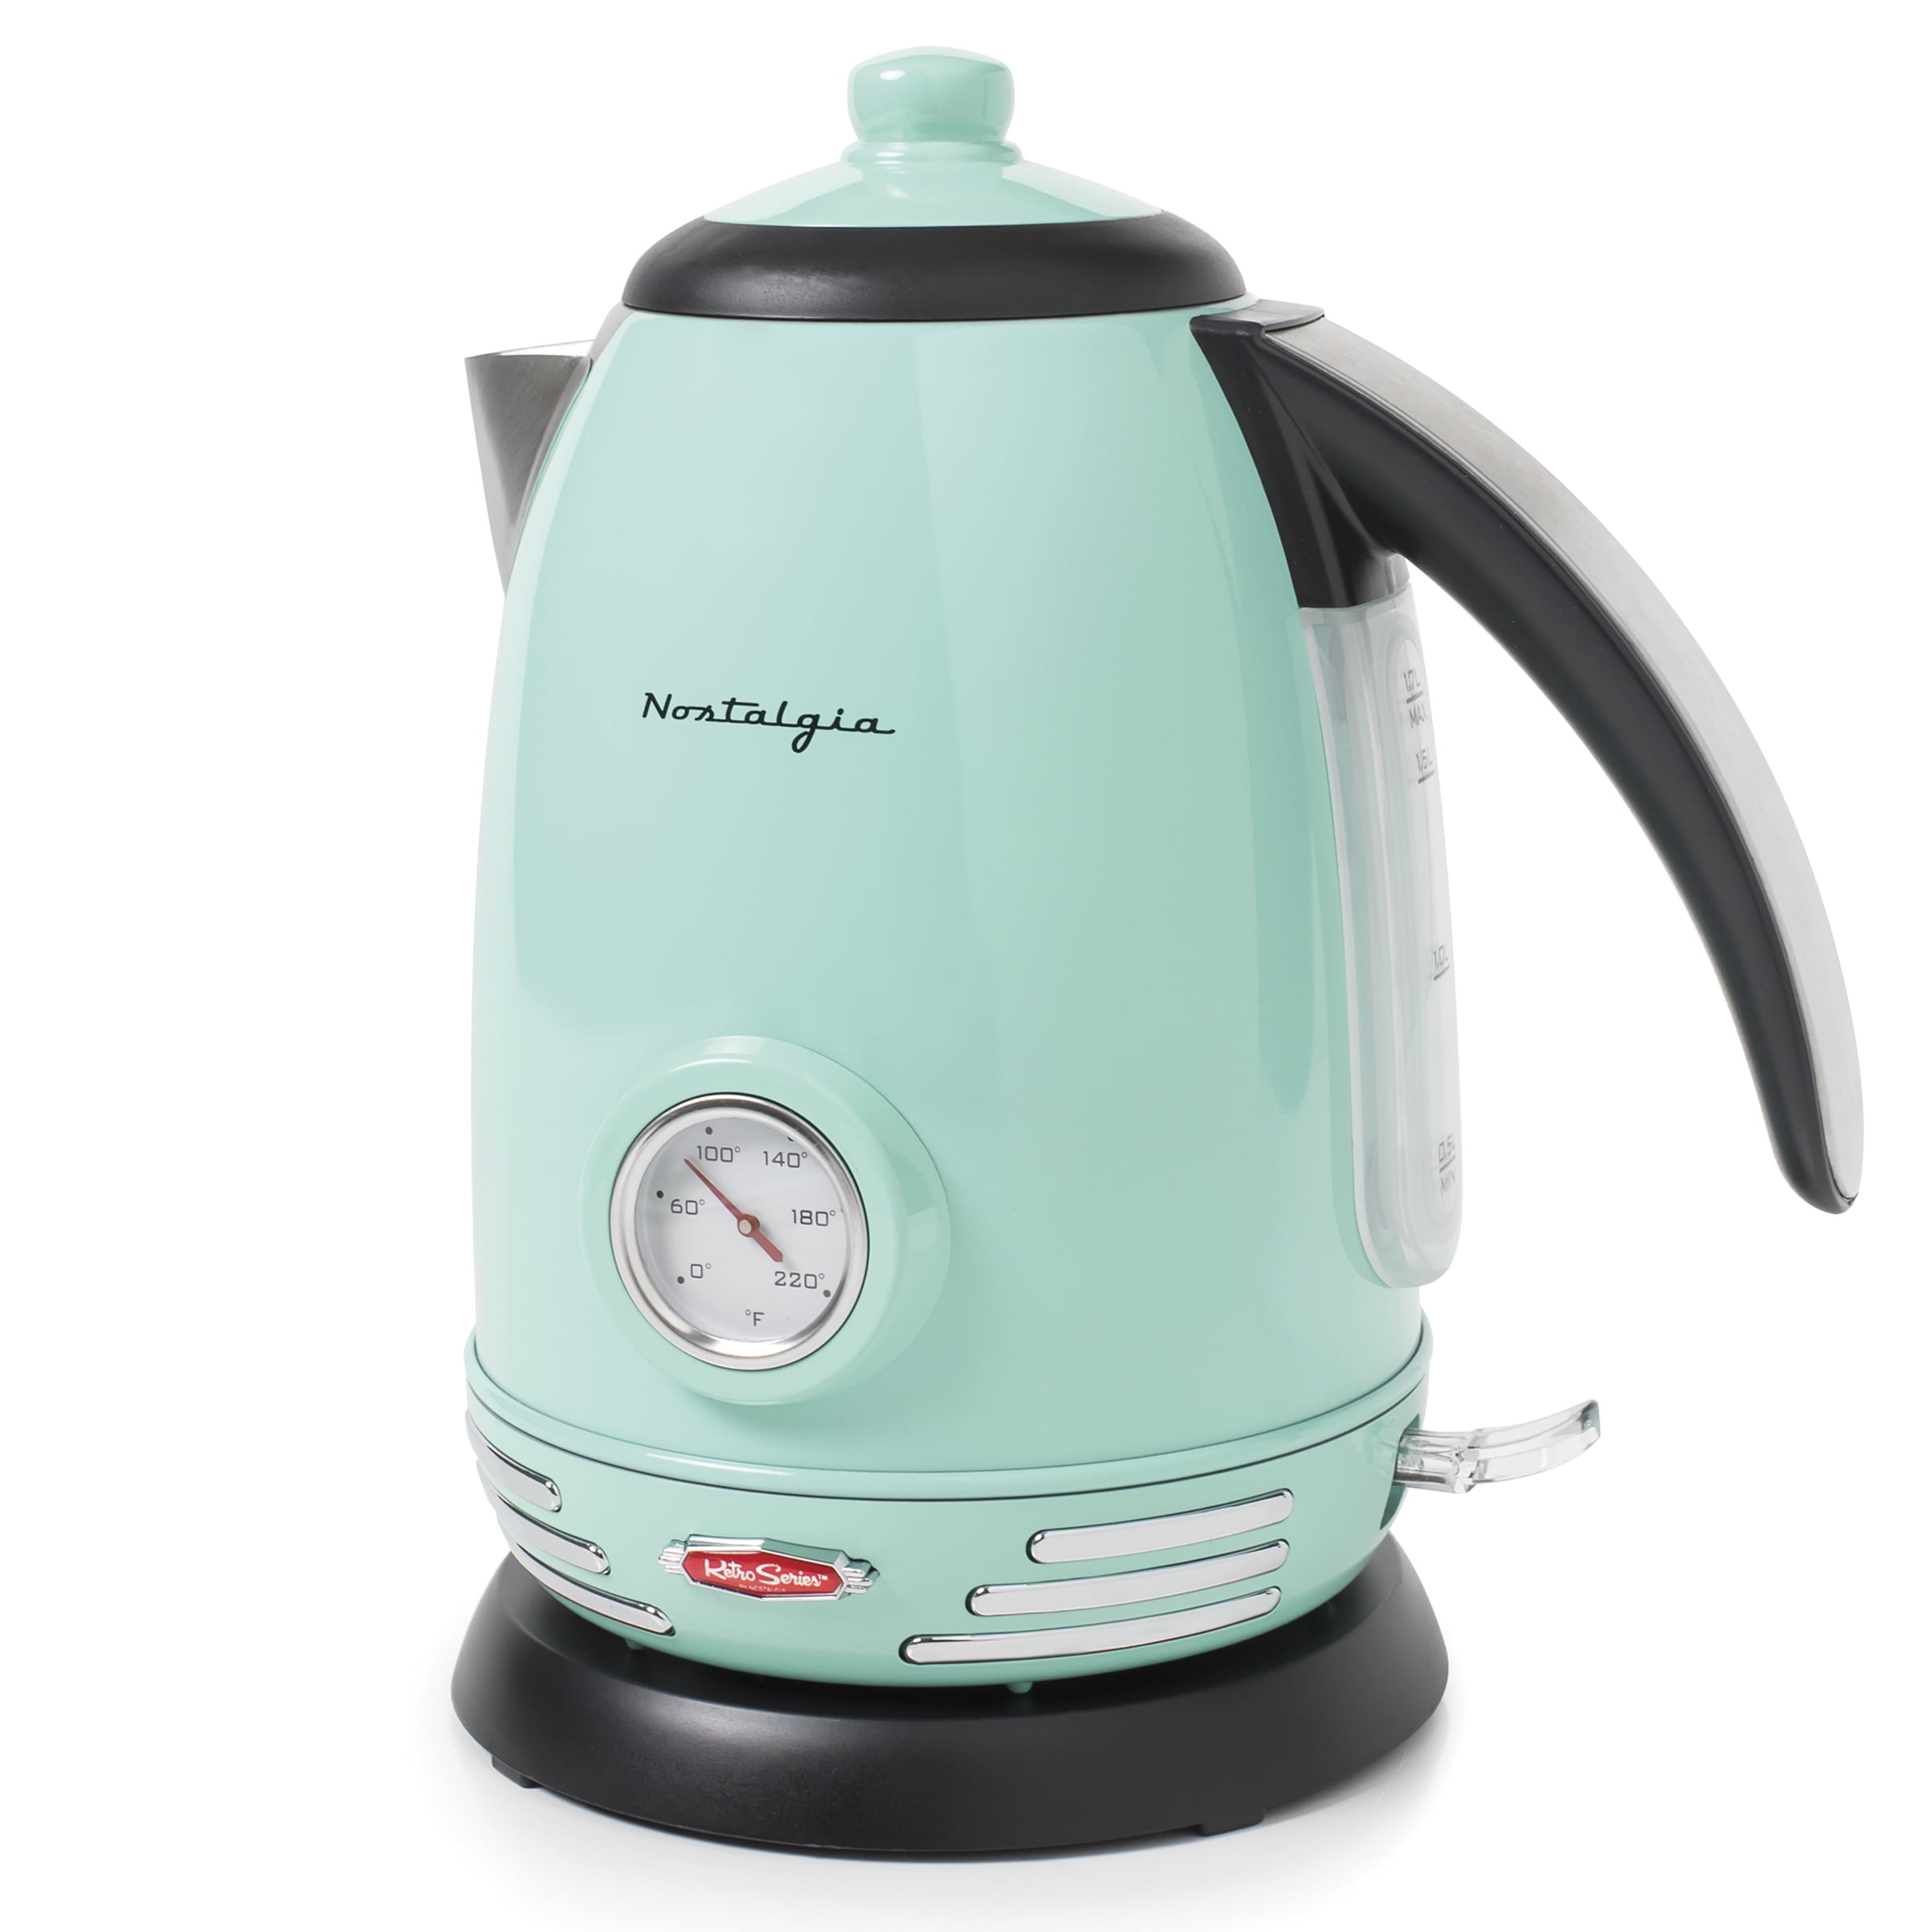 OVENTE Electric 1.7L Kettle + 2 Slice Toaster Combo